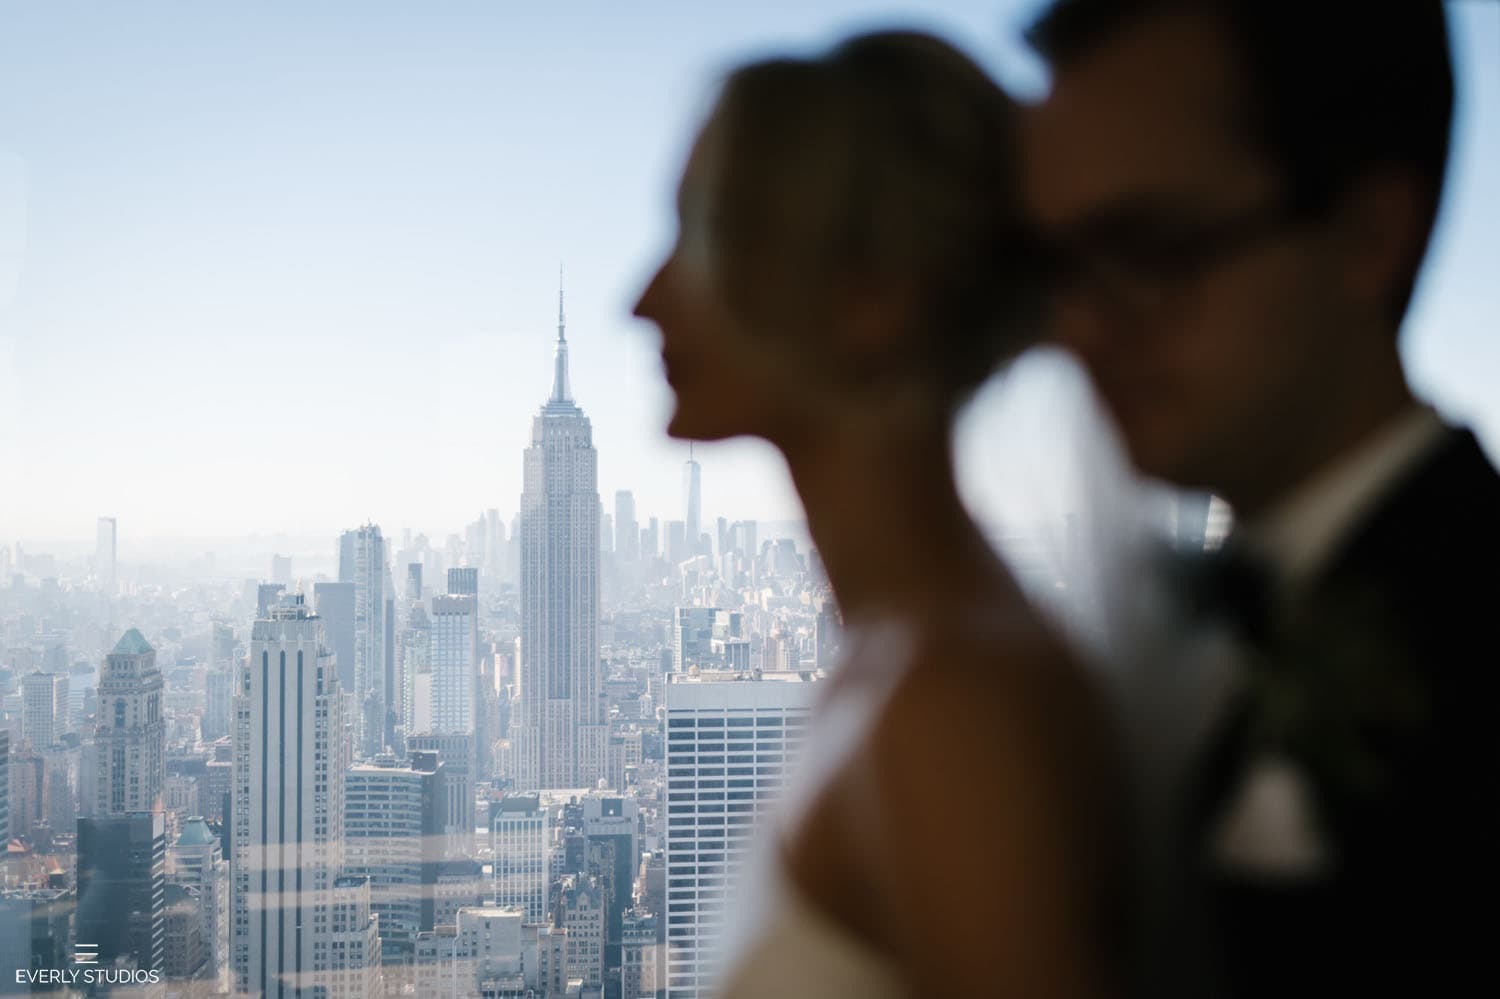 Top of the Rock wedding NYC in New York